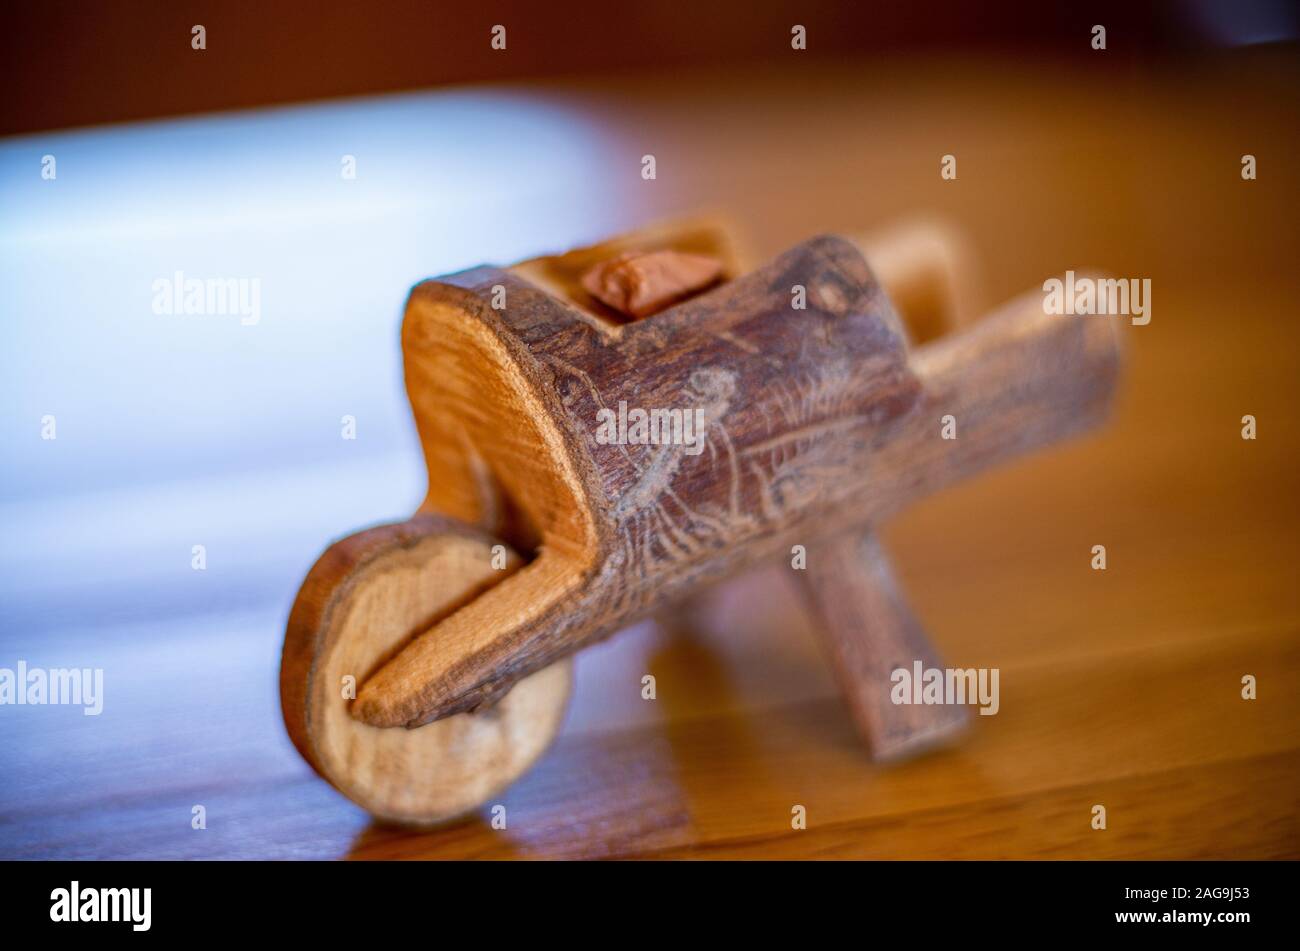 High angle selective focus shot of a wooden figurine looking like a trigger Stock Photo